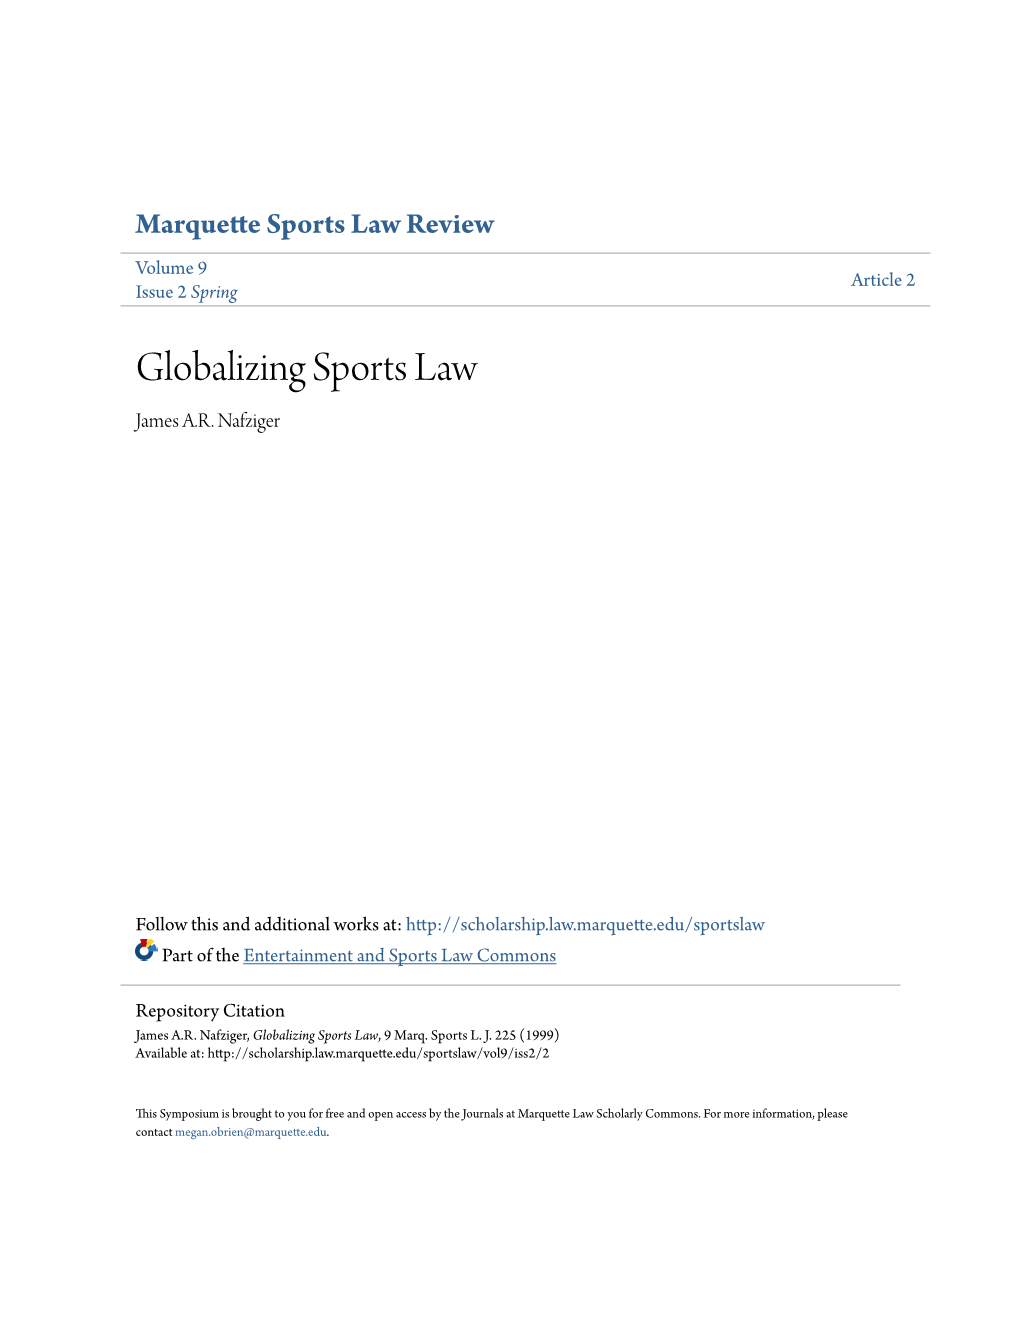 Globalizing Sports Law James A.R